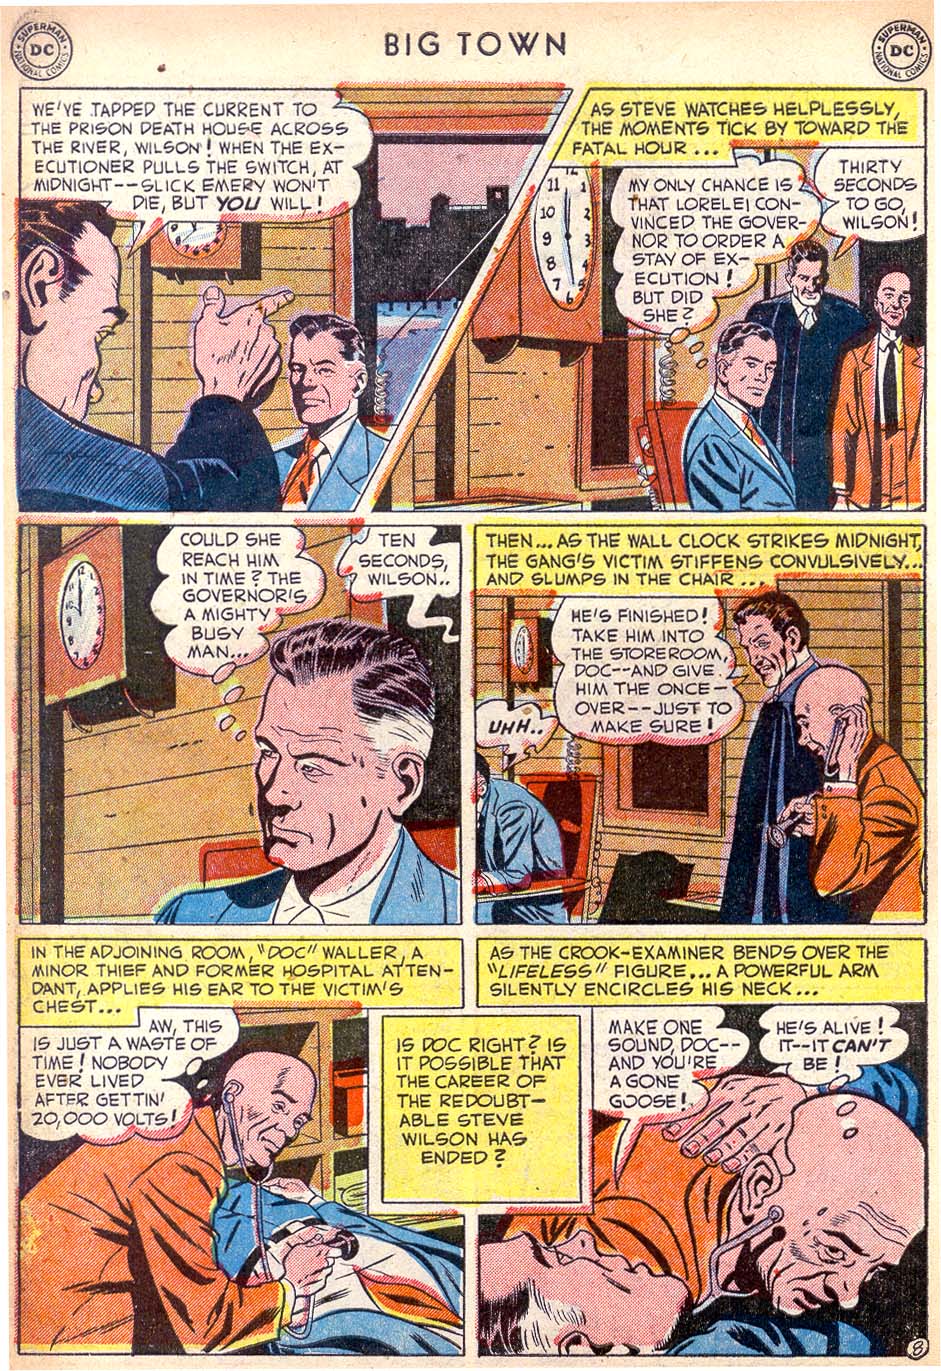 Big Town (1951) 11 Page 9